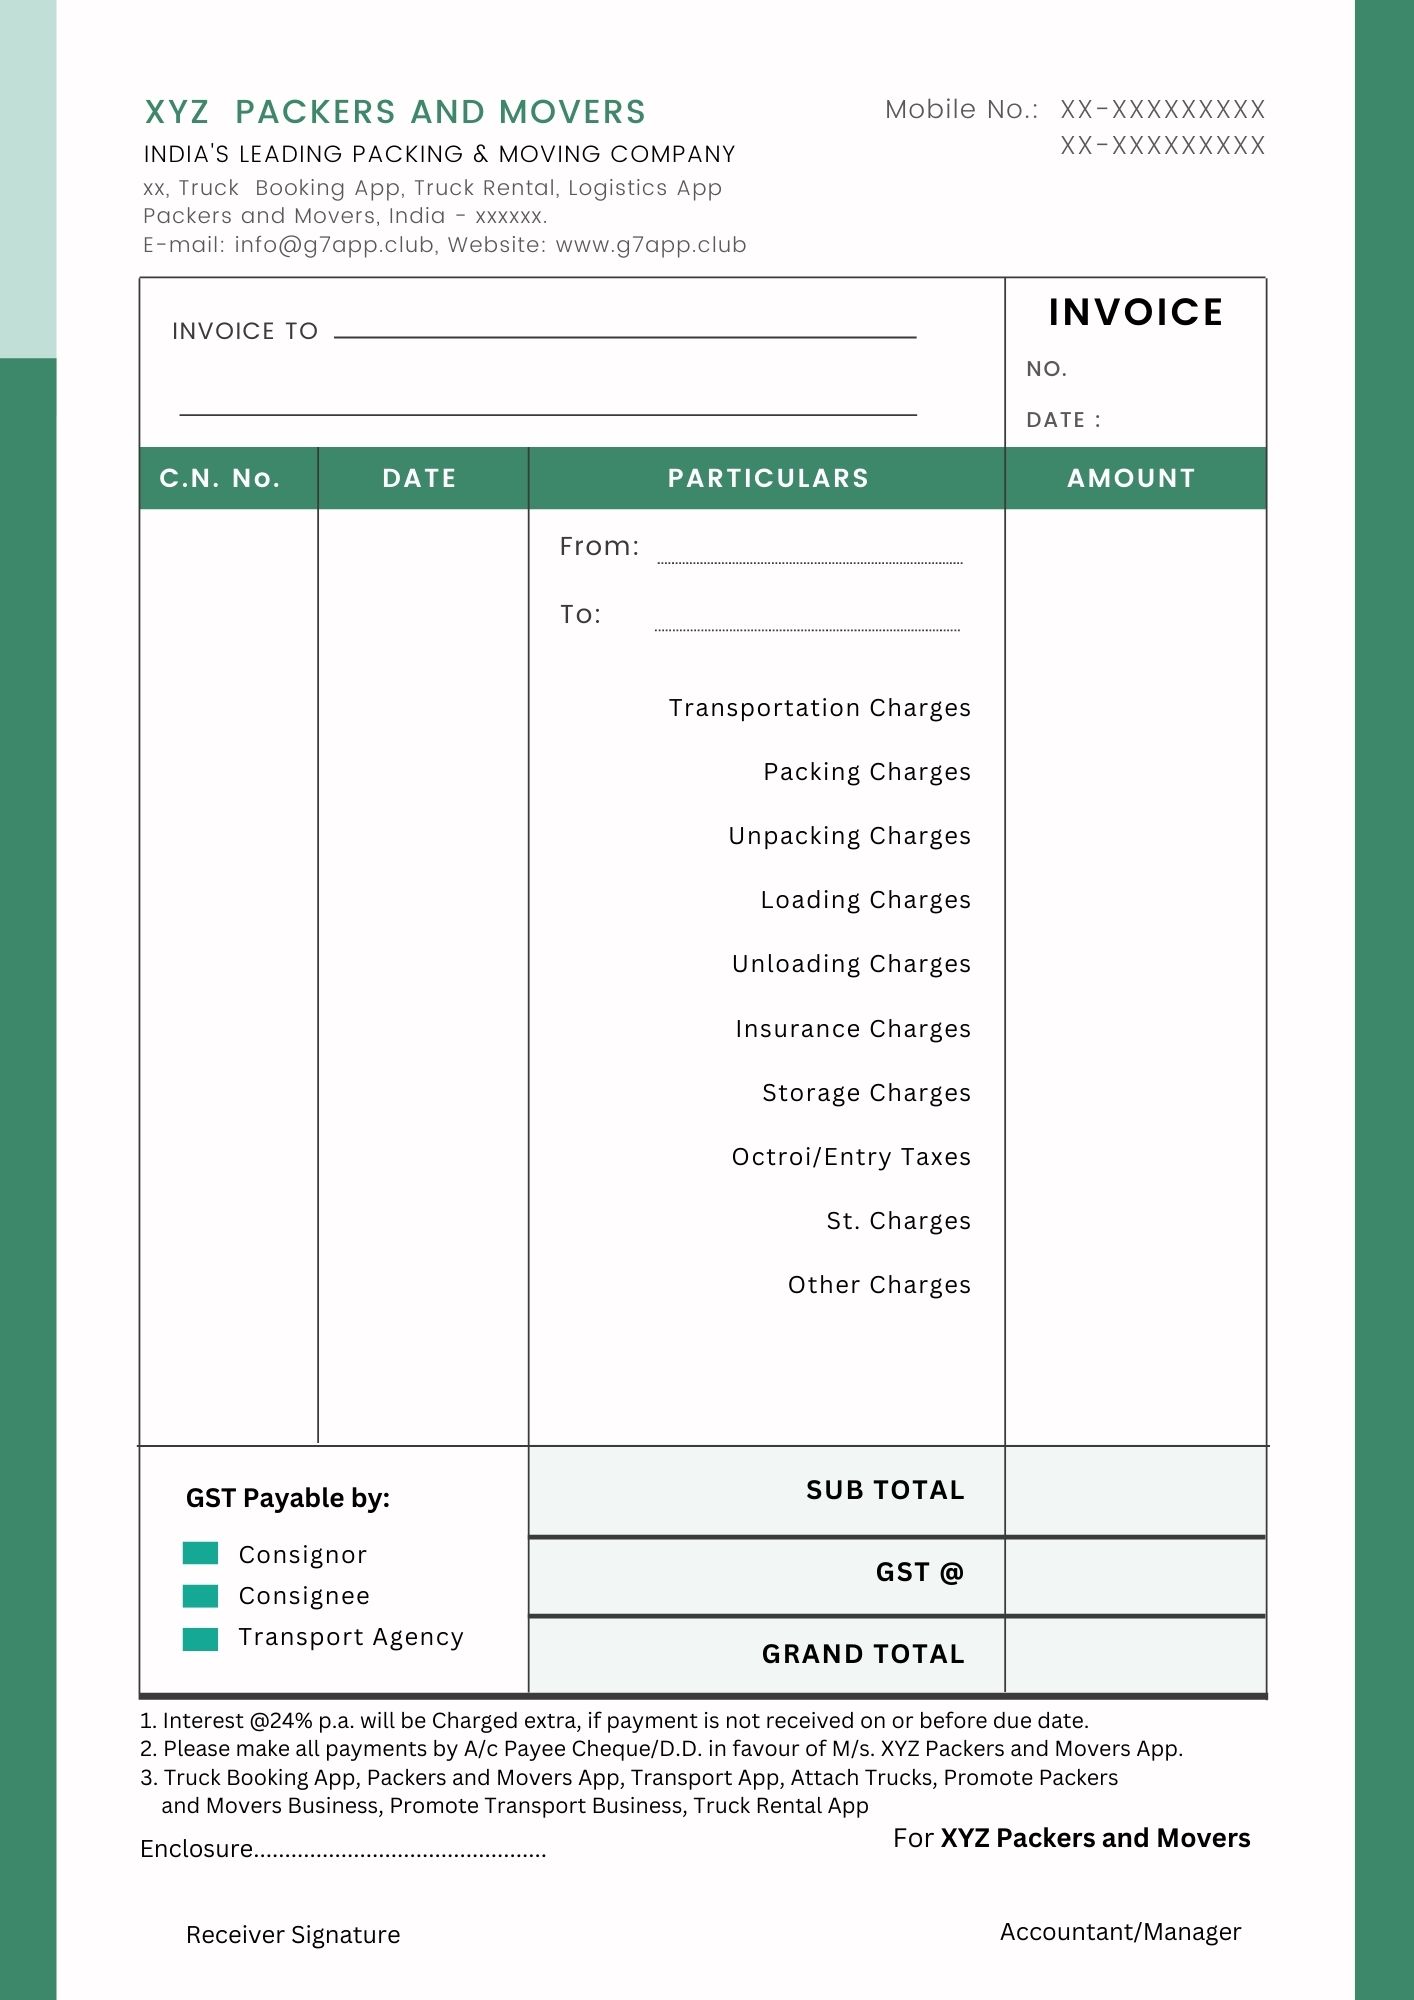 Packers and Movers invoice Format jpg, free to download, you can Use for commercial purpose, Green, white and light green colour use